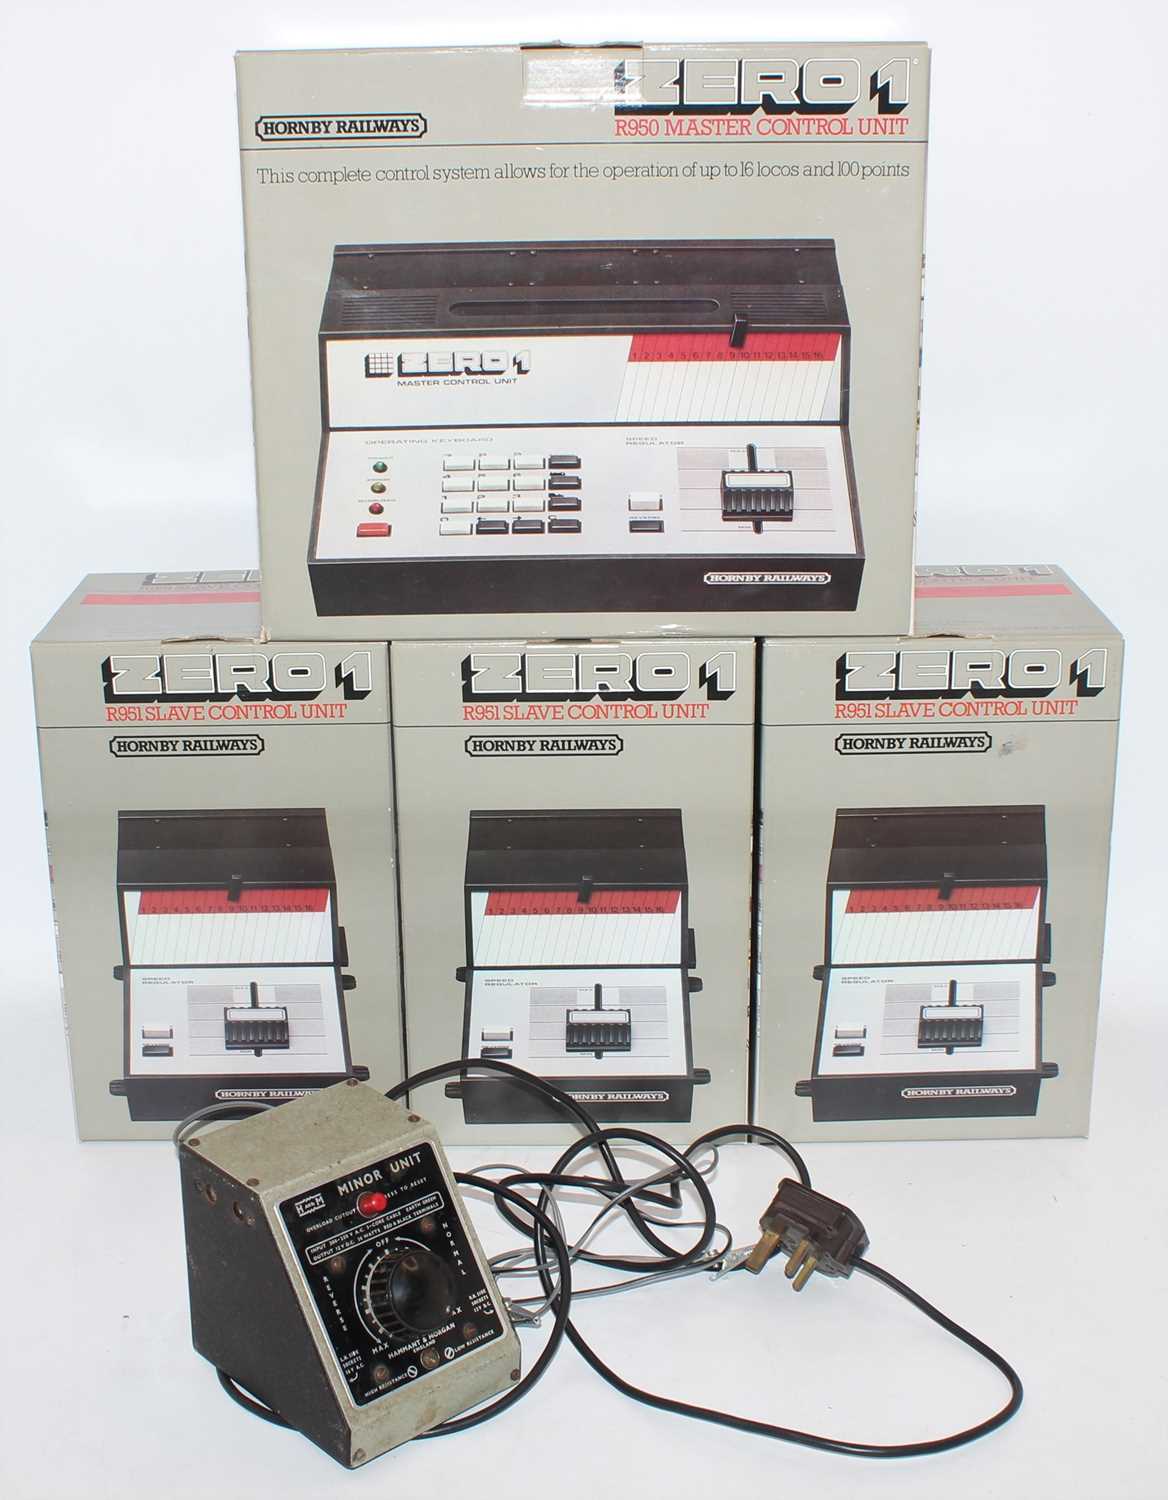 A collection of Hornby Railways Zero 1 master control units and slave control units, housed in the